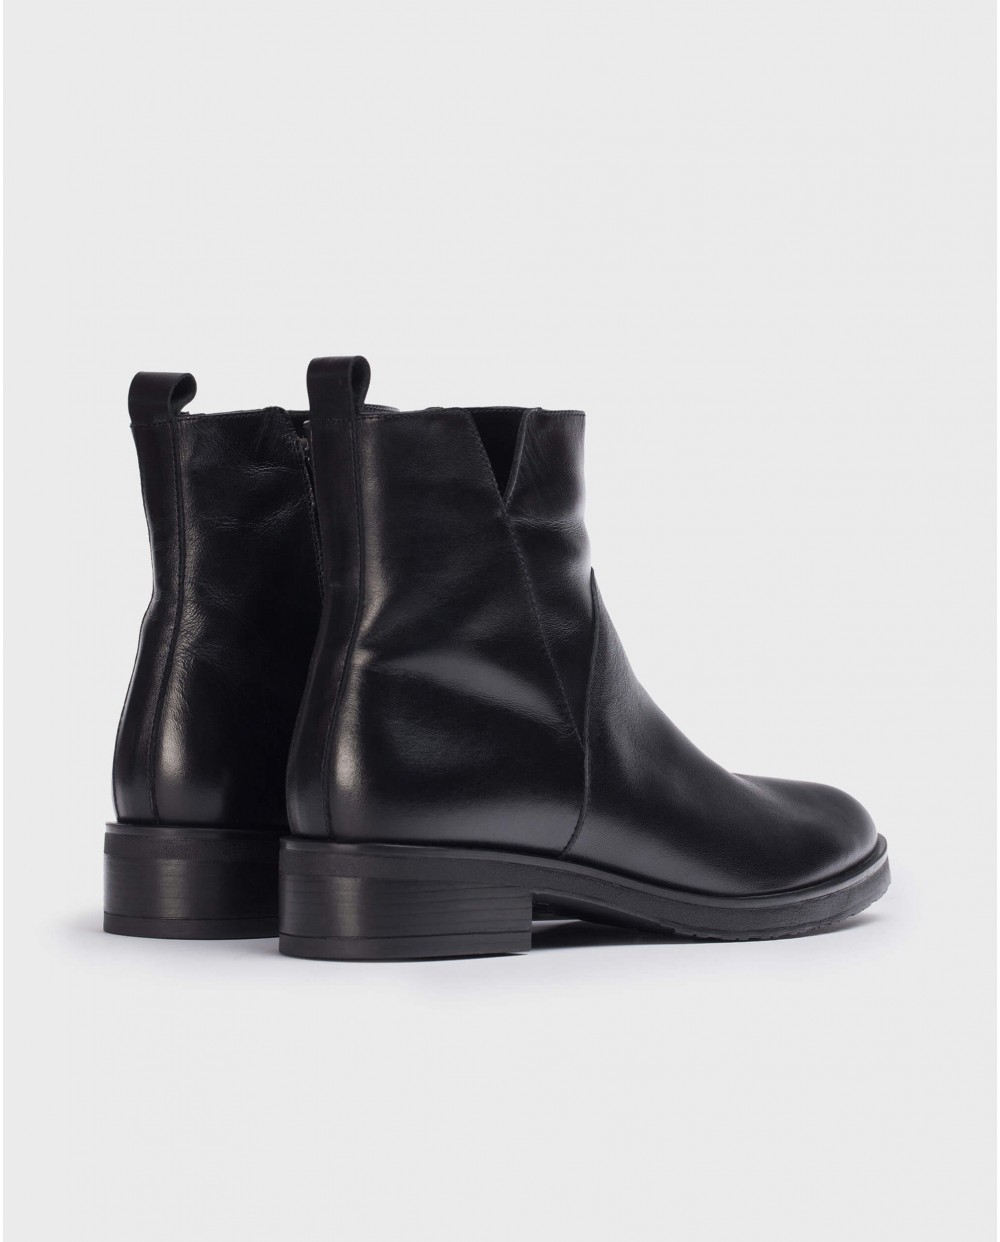 Wonders-Ankle Boots-Black Milo Ankle Boot